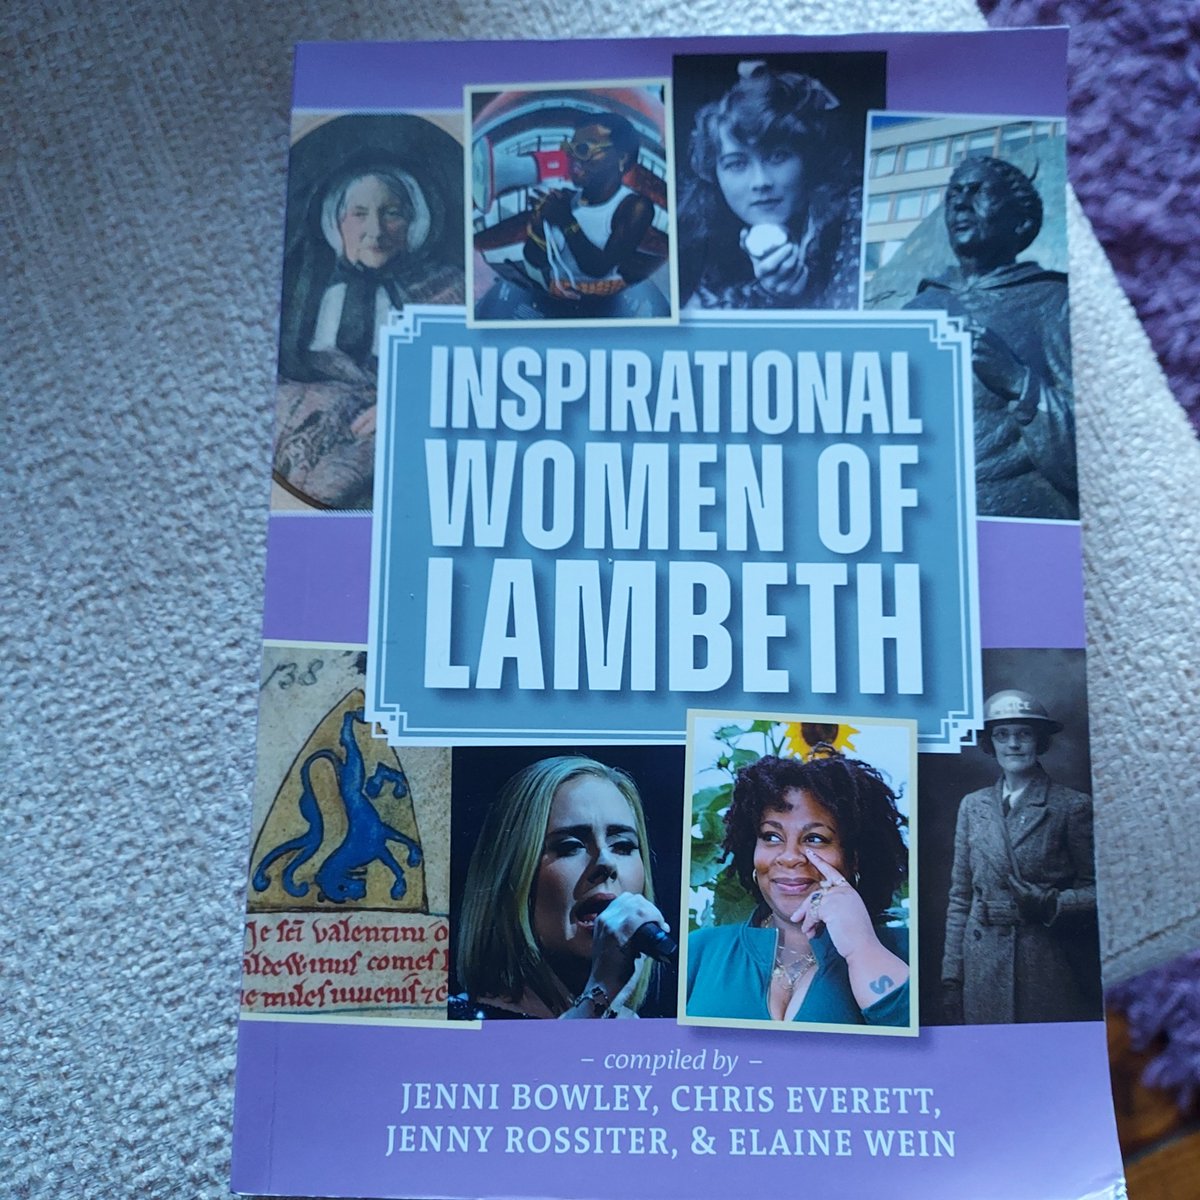 Check out 'Inspiring Women of Lambeth', written by colleagues from @GuidesLambeth. Features 130 amazing women from all walks of life, including nursing. Entries on Florence, Mary Seacole, Kofoworola Abeni Pratt, Vera Brittain, Sarah Wardroper & Alicia Lloyd Still. #nursinghist